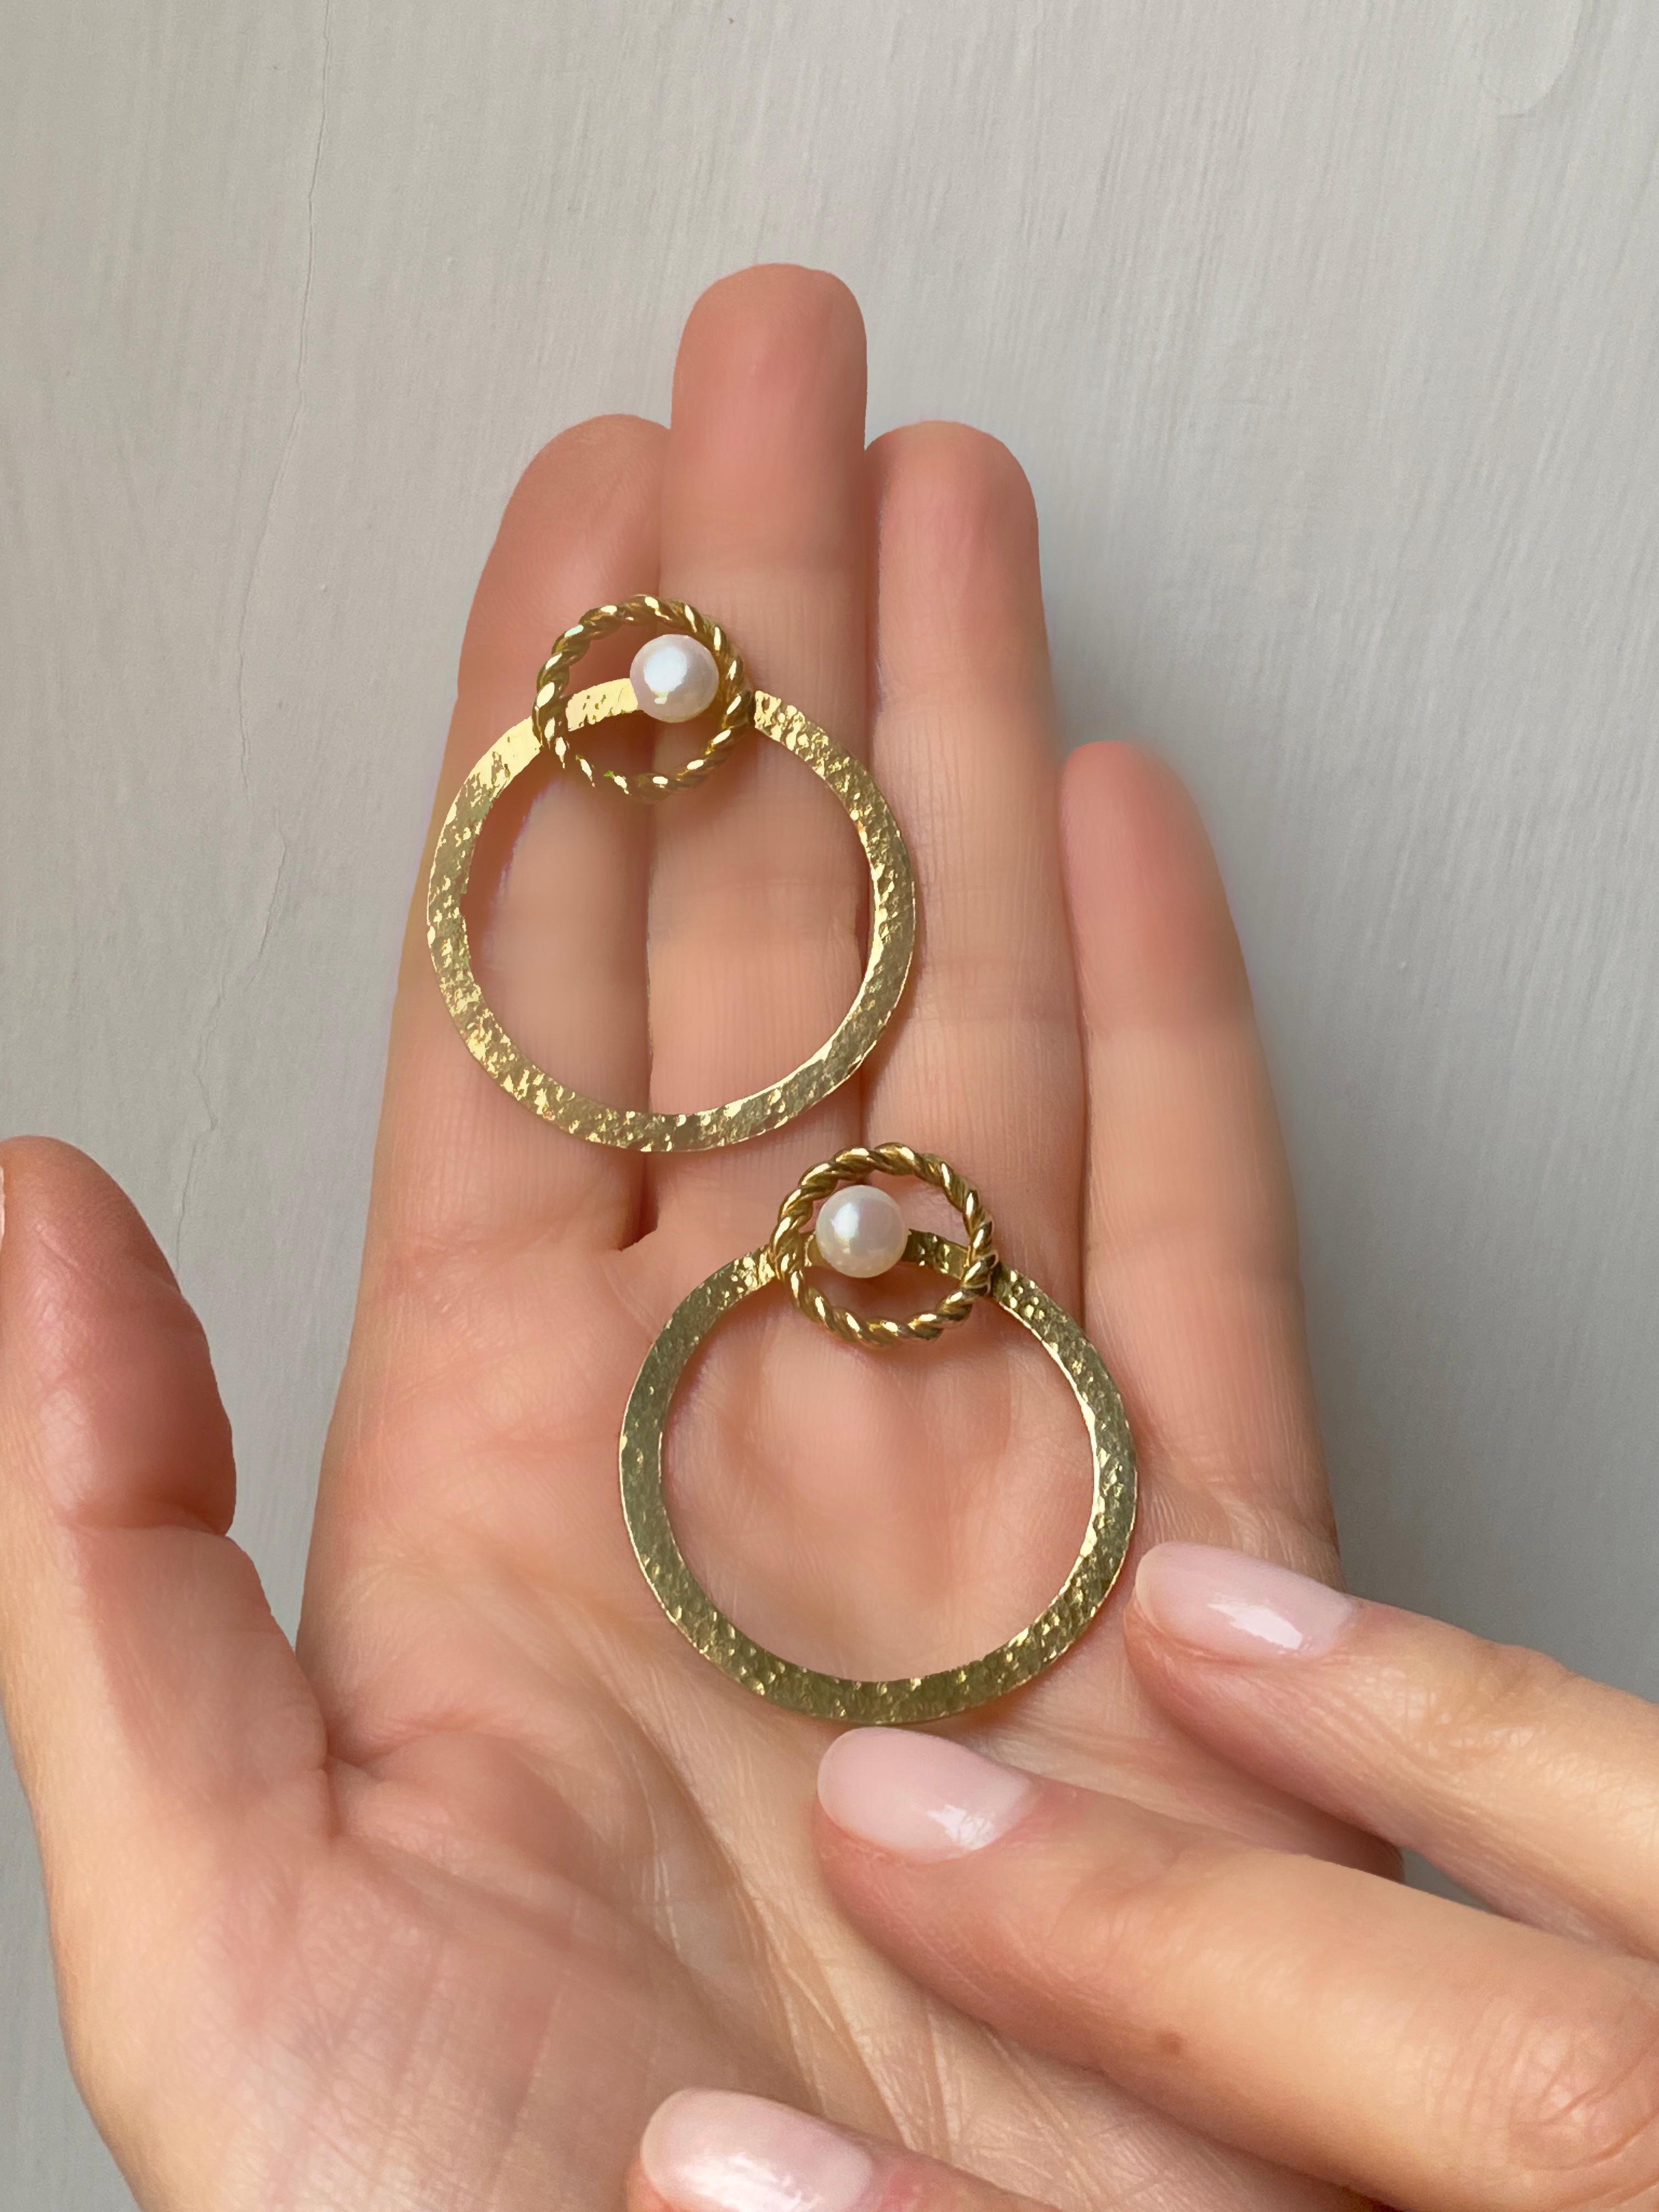 Rossella Ugolini 18K Yellow Gold Hammered Handcrafted Circle Large Hoop Earrings For Sale 3